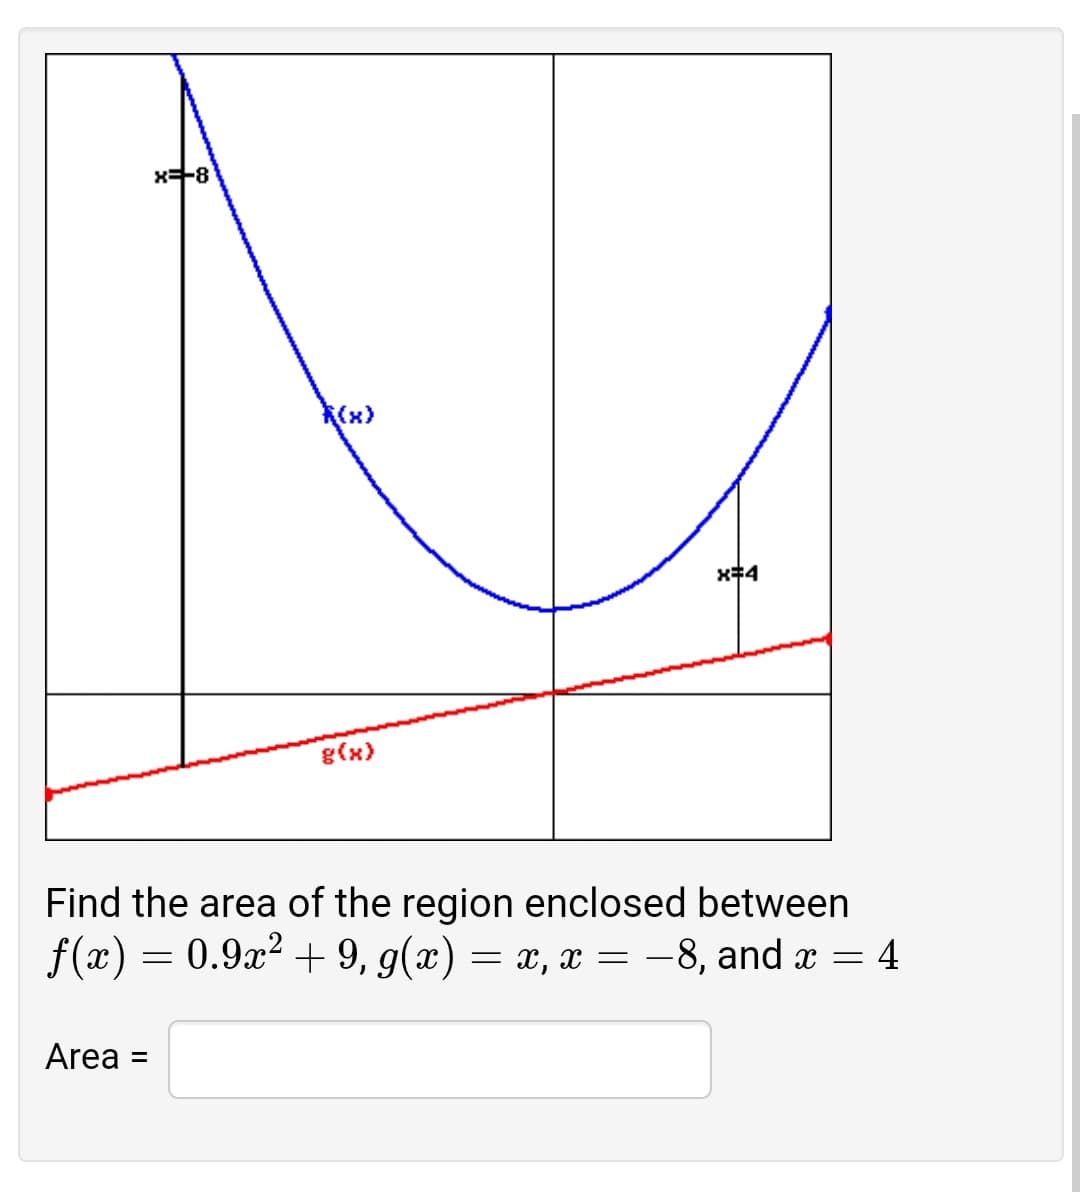 x+8
(x)
x#4
g(x)
Find the area of the region enclosed between
f(x) = 0.9x2 + 9, g(x) = x, x = -8, and x = 4
Area
